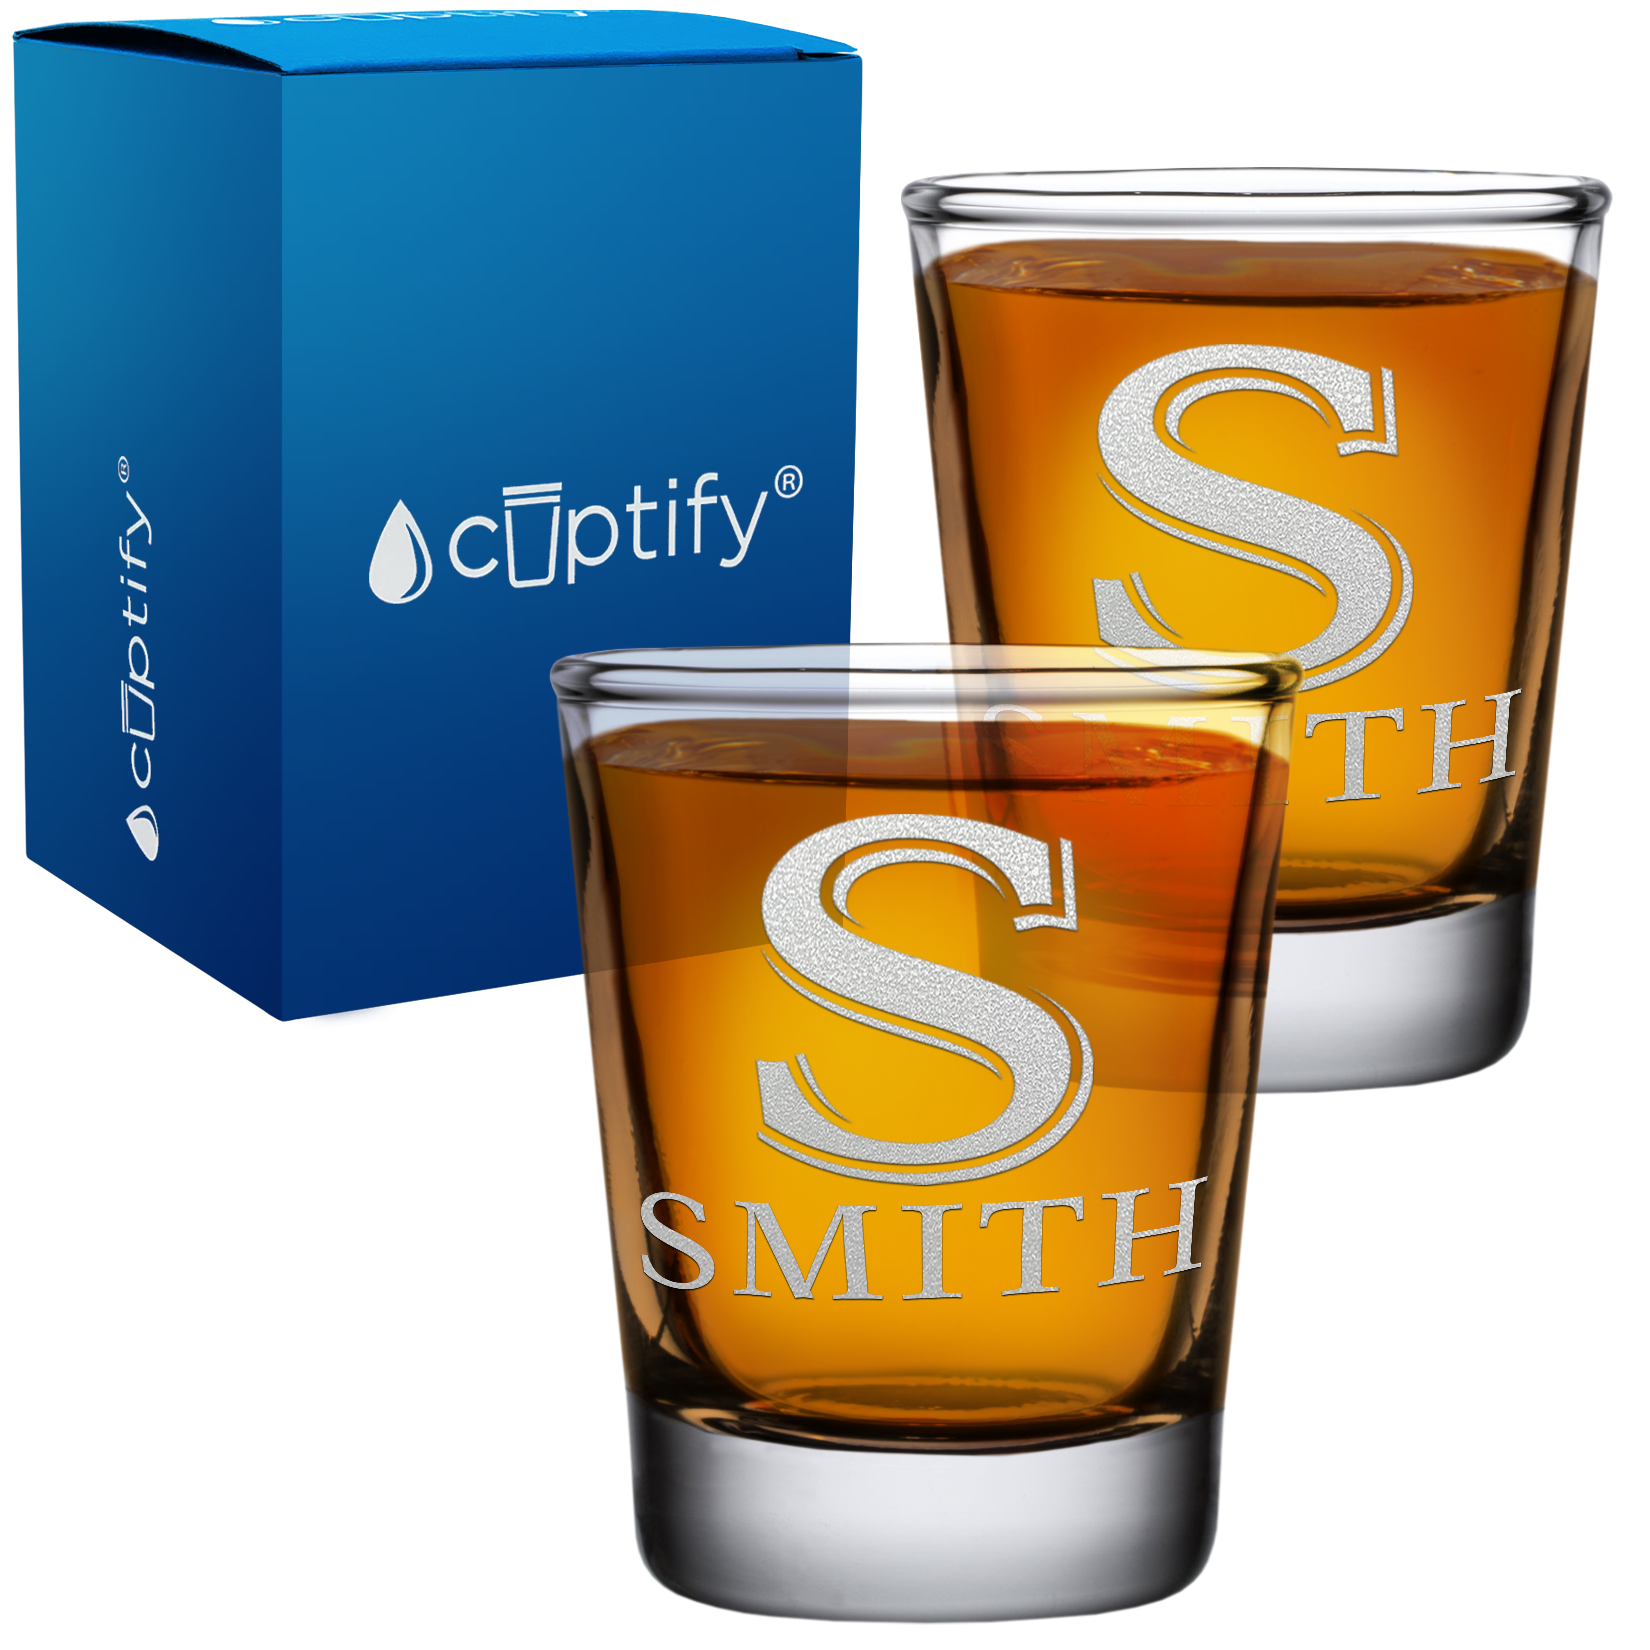 Personalized Initial and Name 2oz Shot Glasses - Set of 2